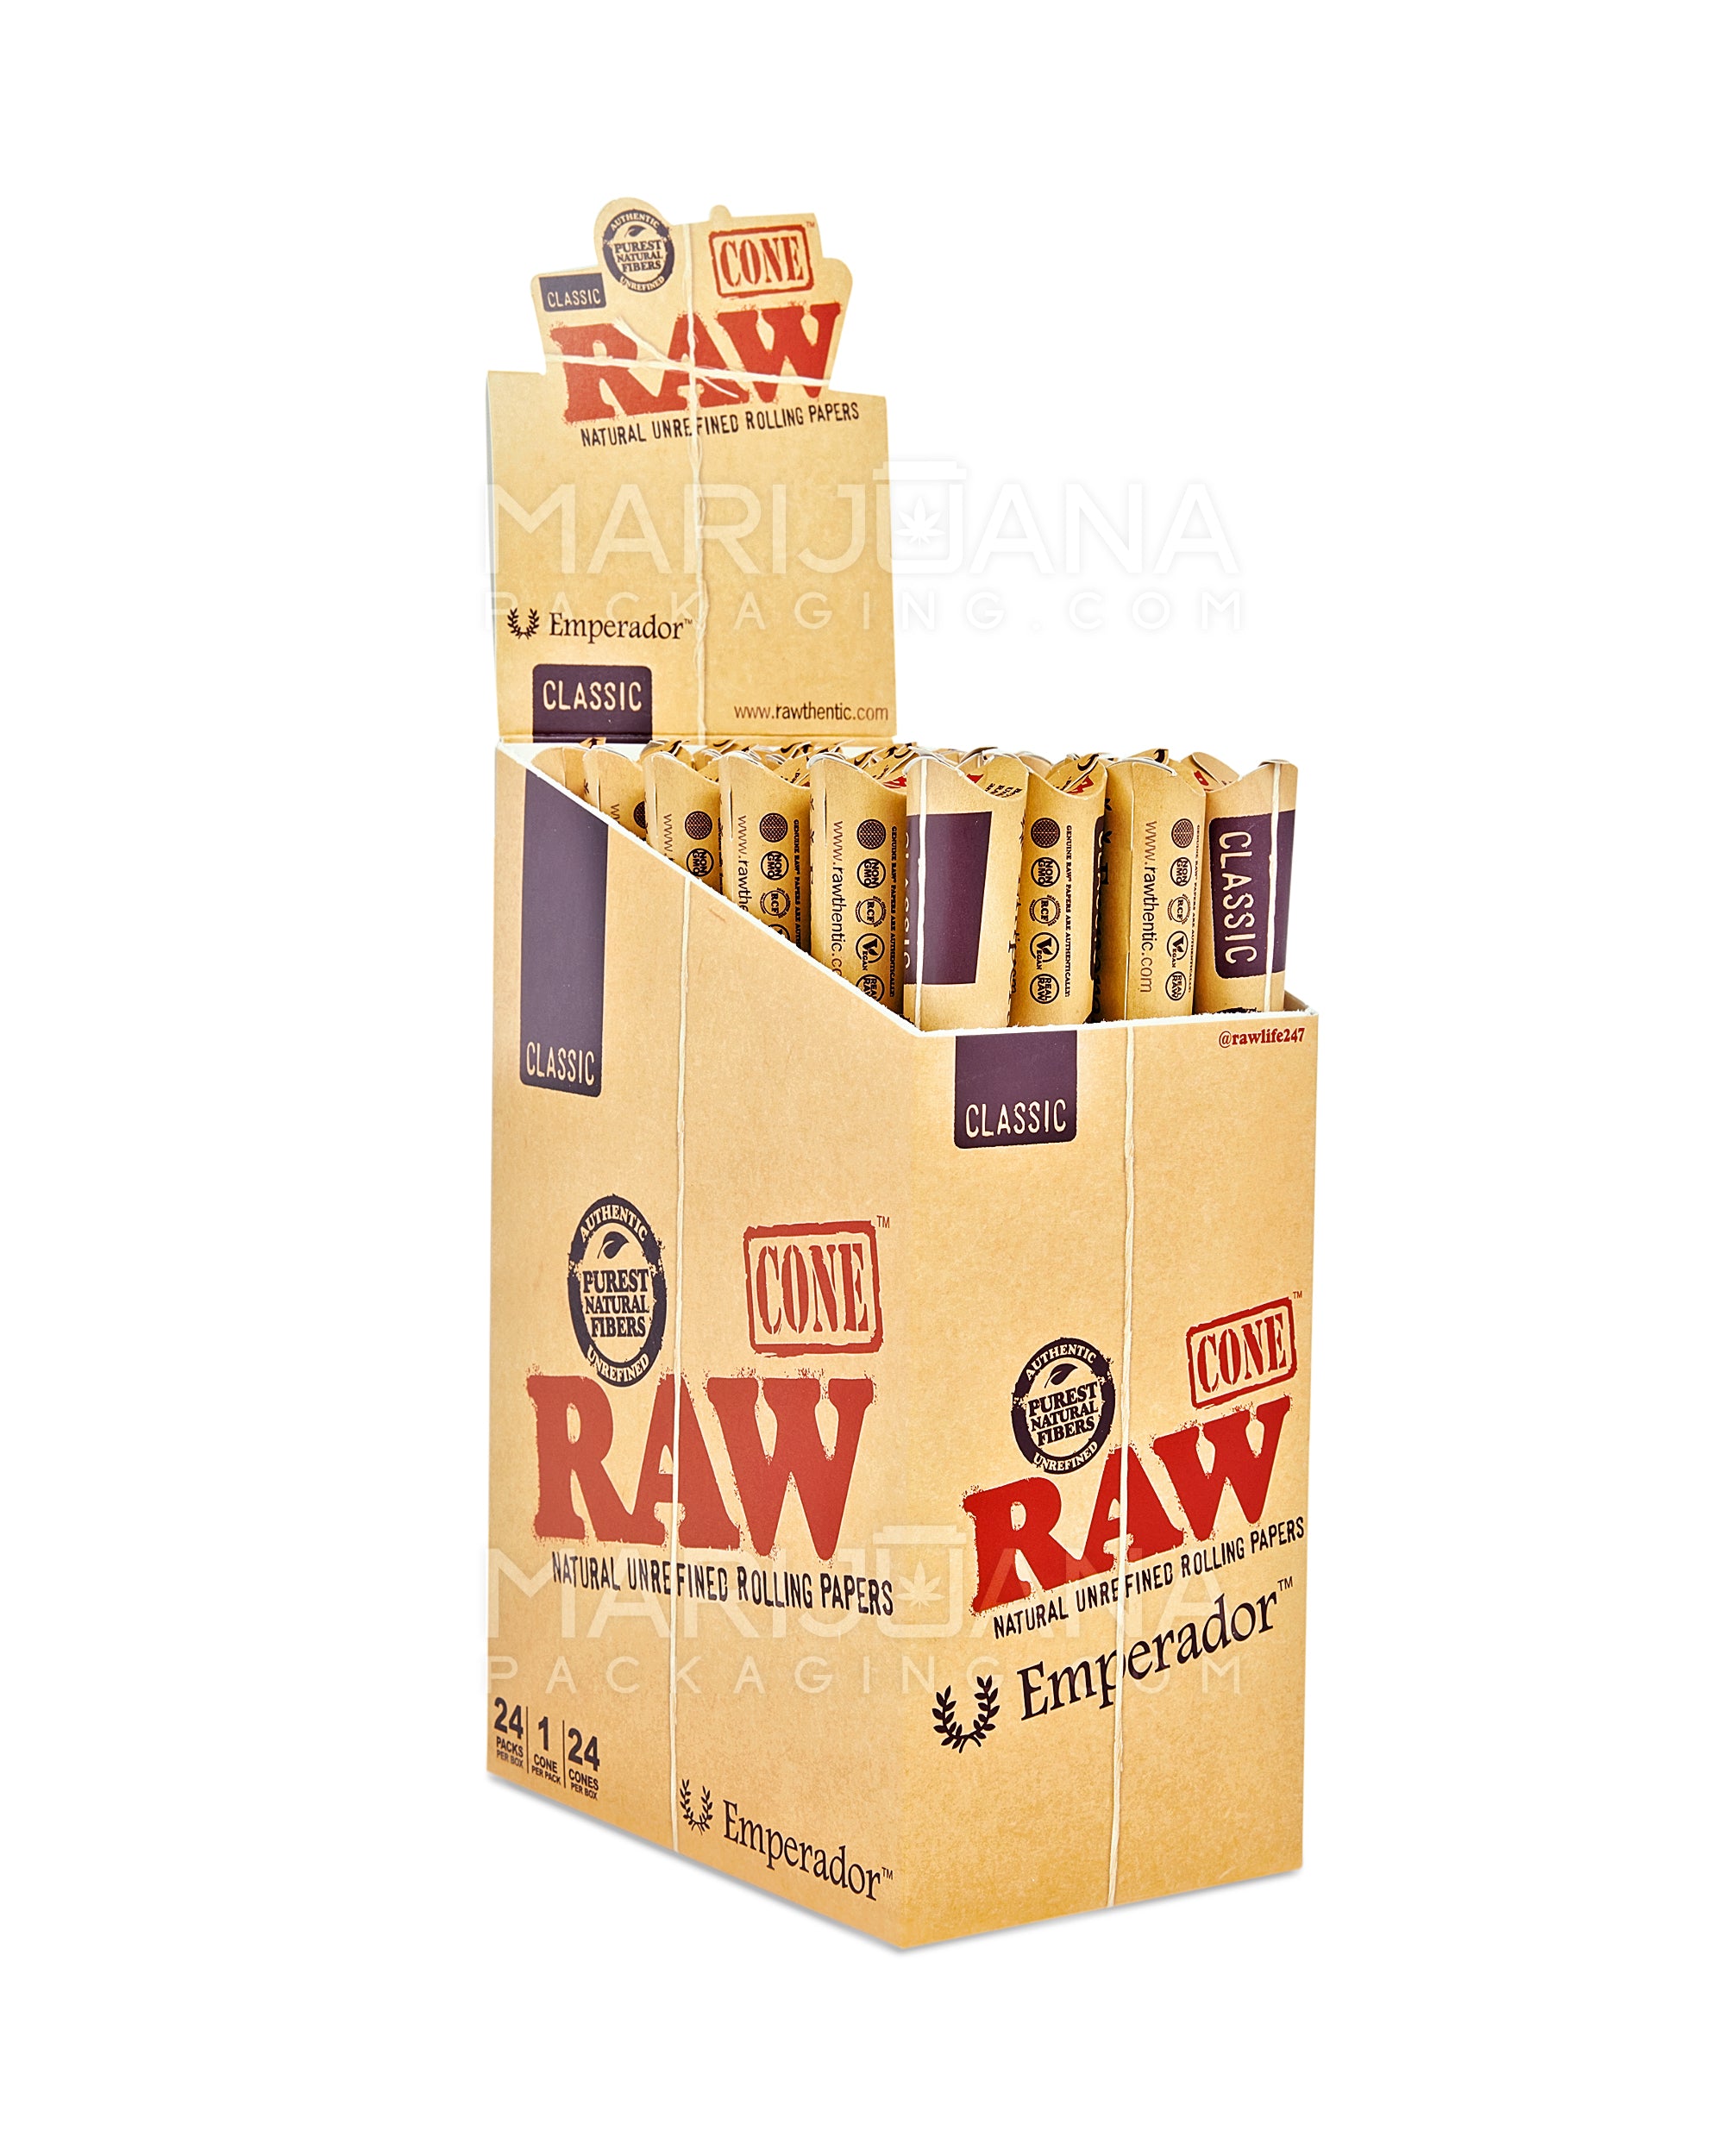 King Size Pre-Rolled Cones, Organic Hemp Paper Pre-Rolled Cones